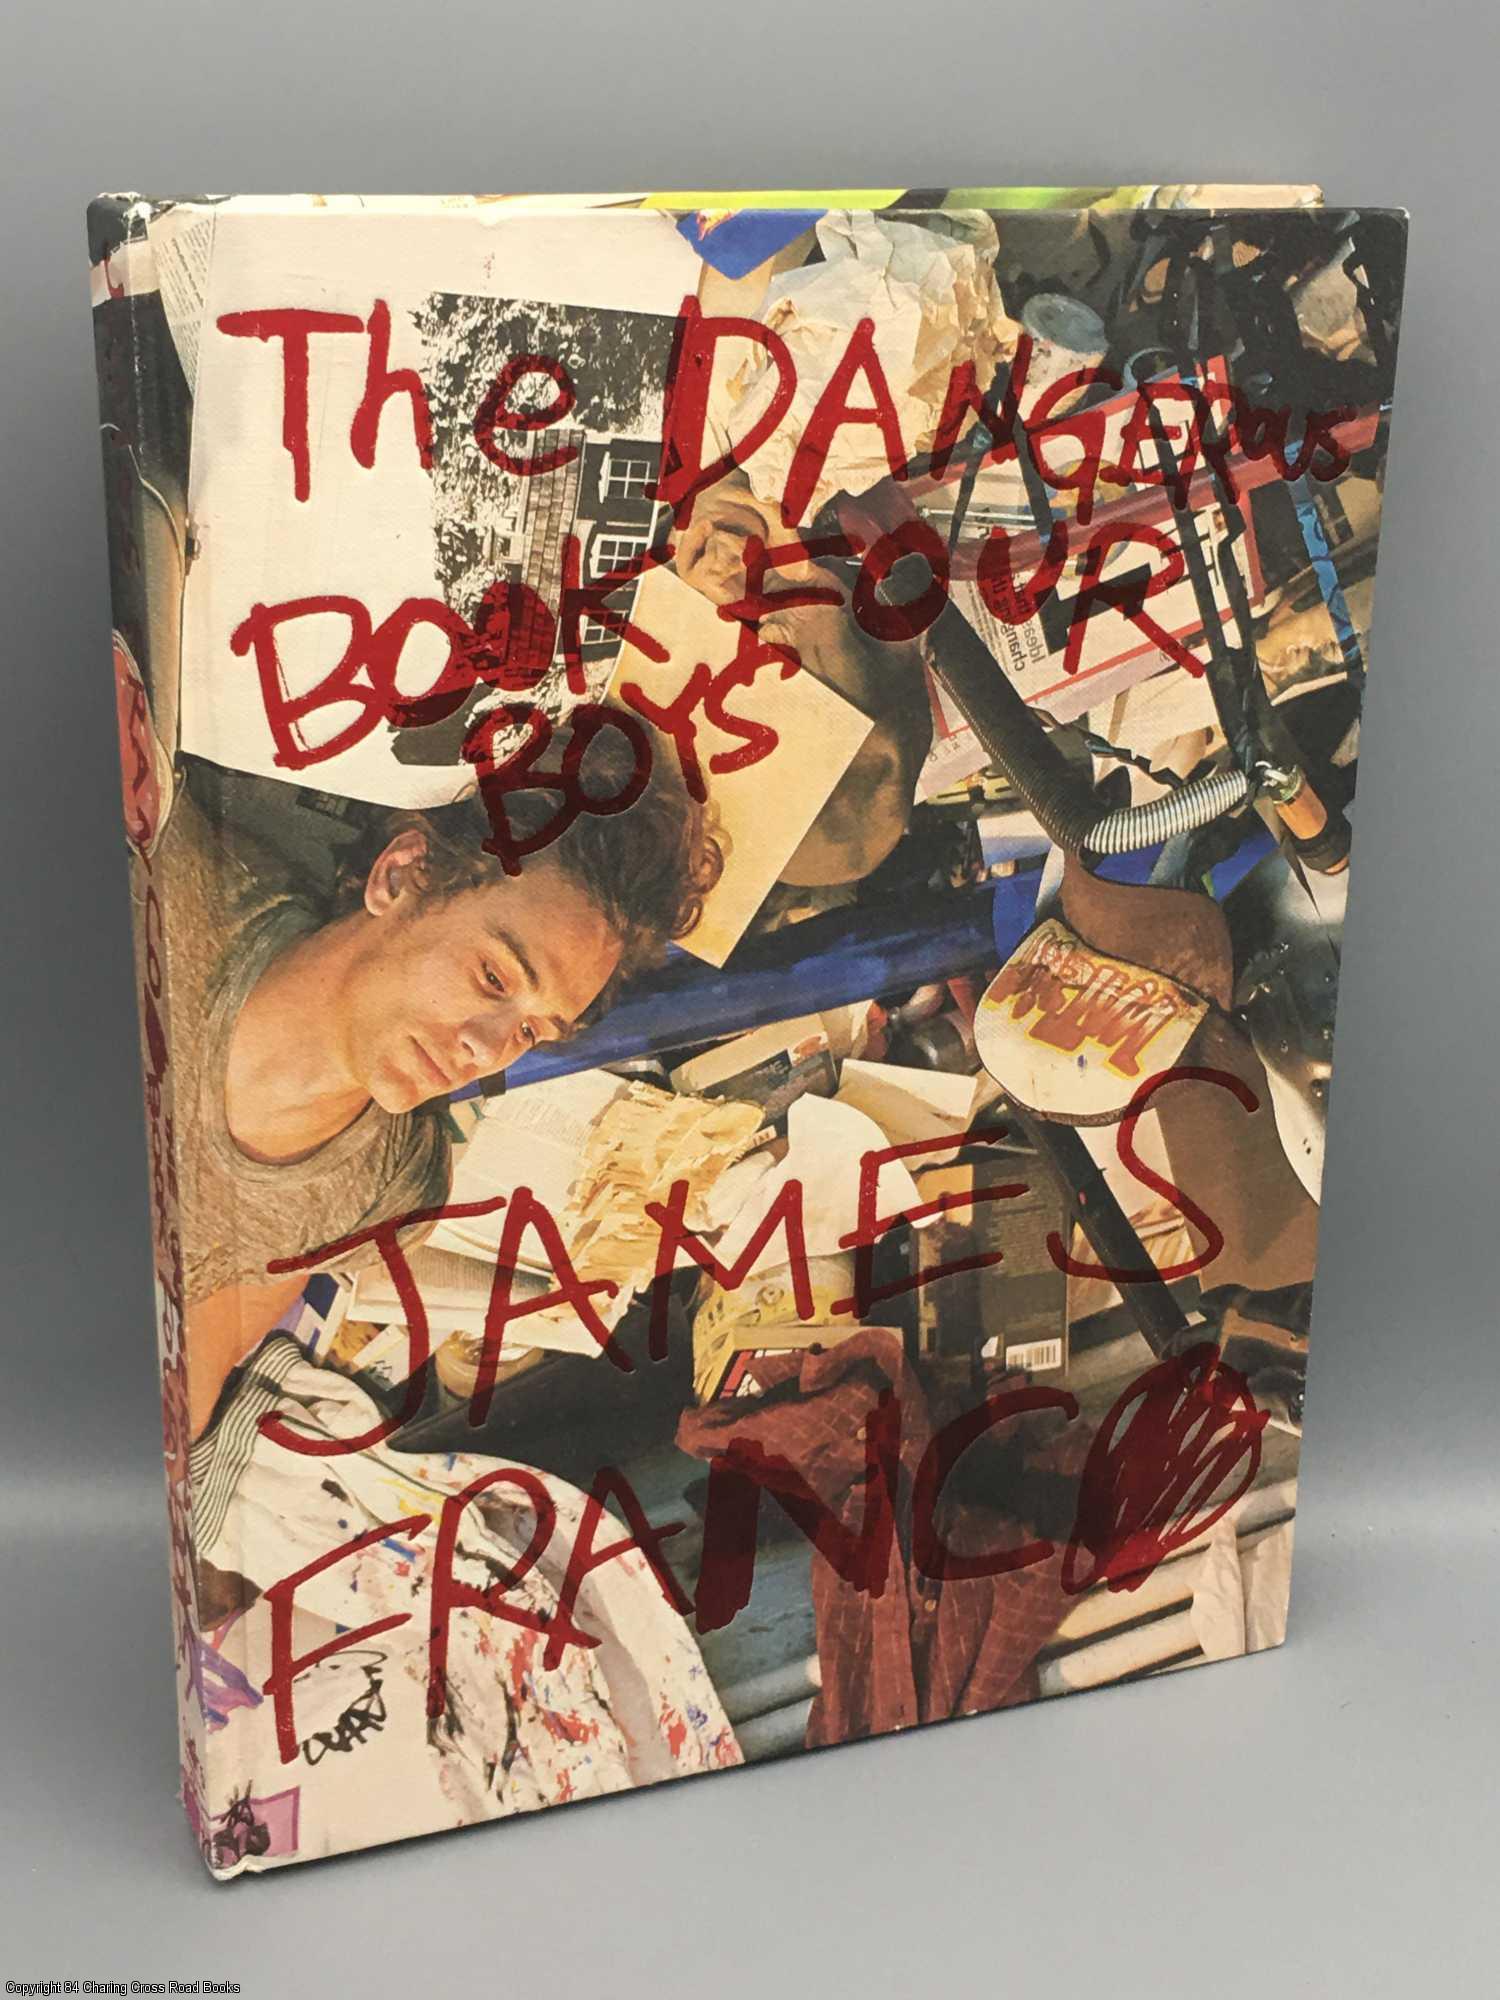 James Franco: Dangerous Book Four Boys by James Franco on 84 Charing Cross  Rare Books